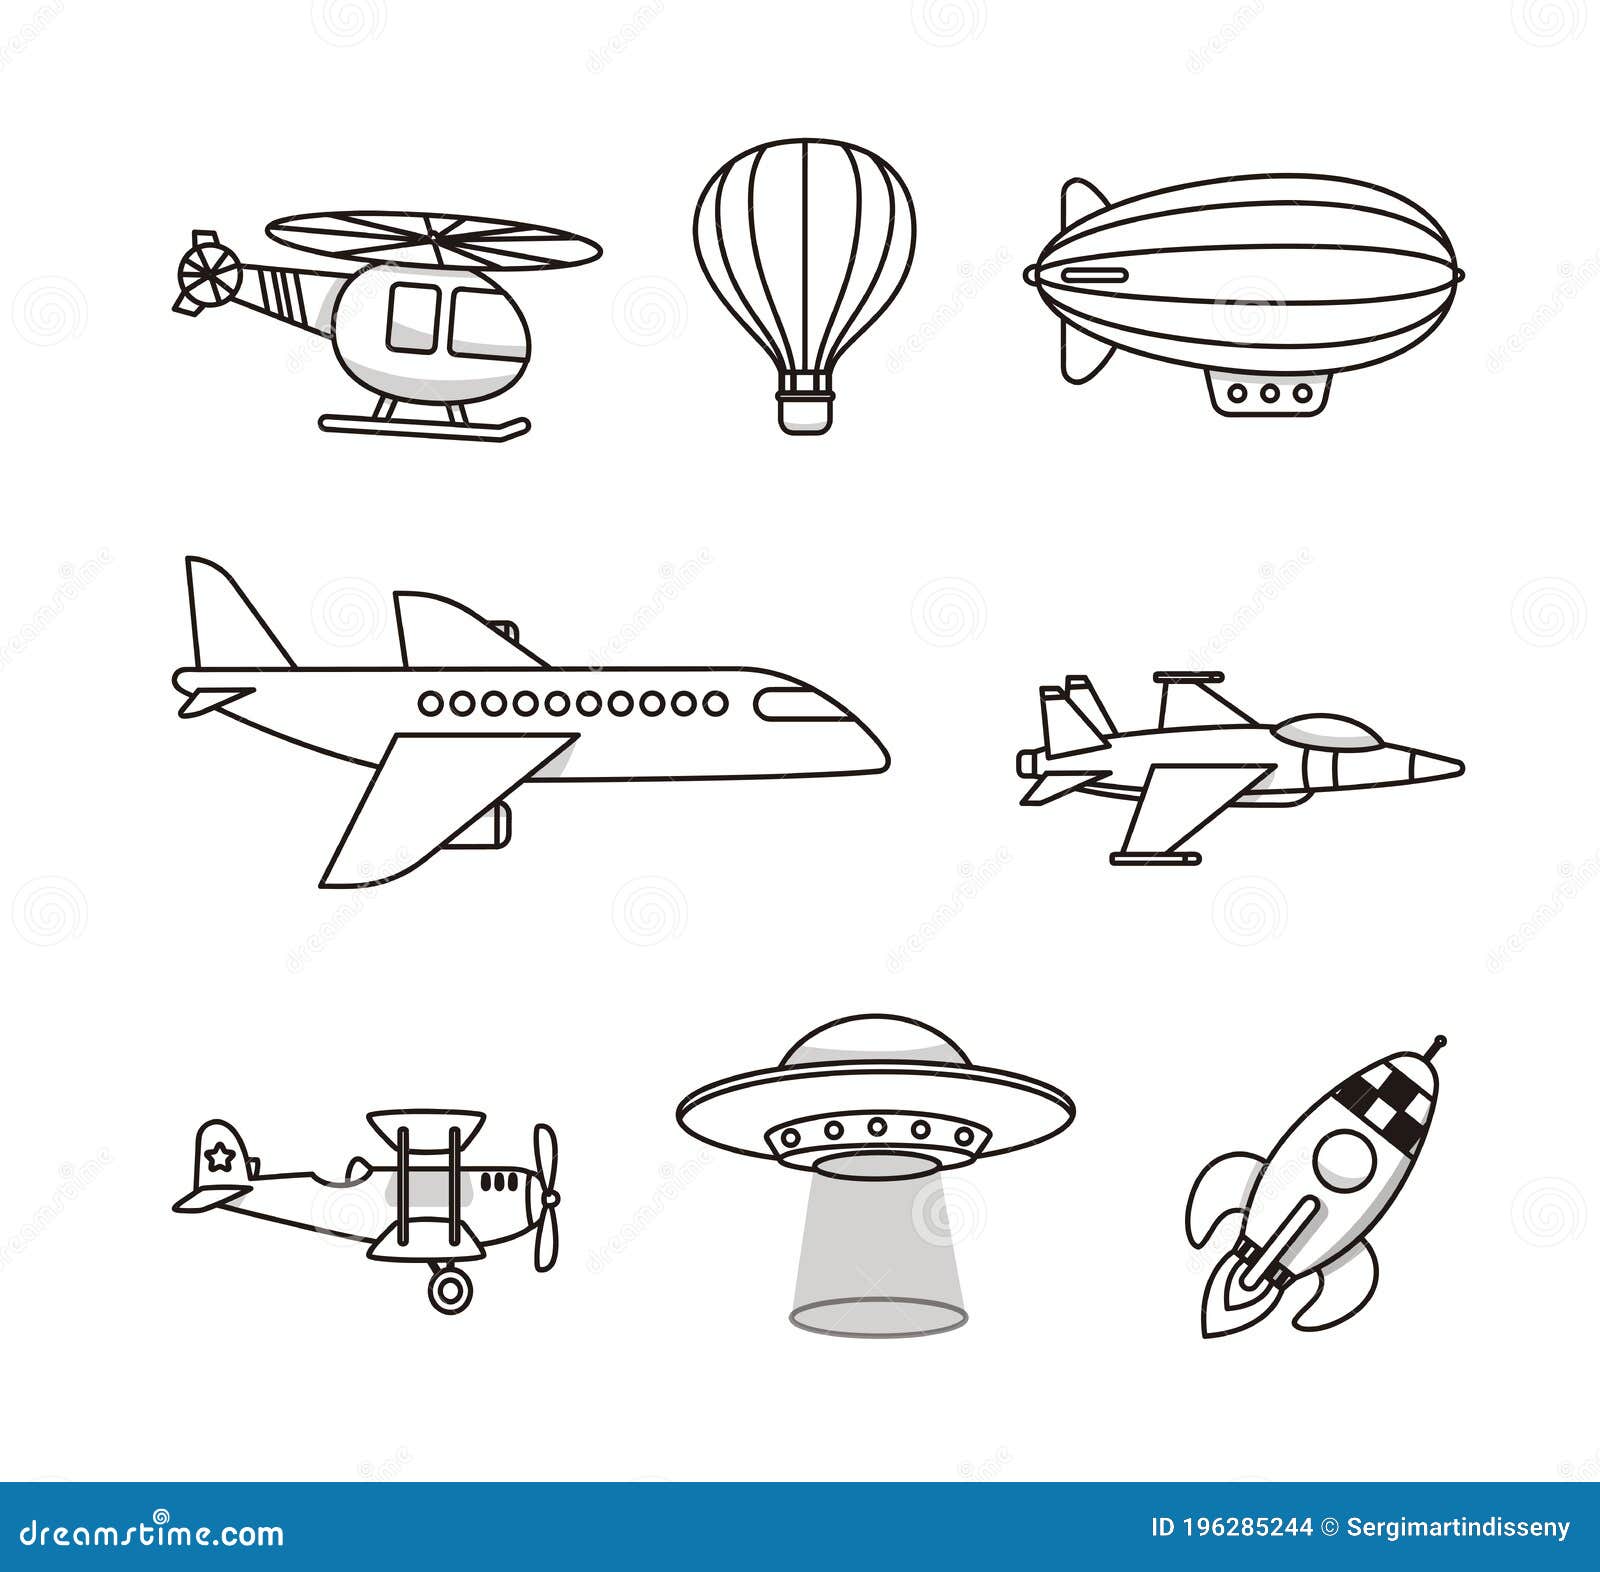 Coloring page No.1410 - Plane Vehicles Aerial vehicles